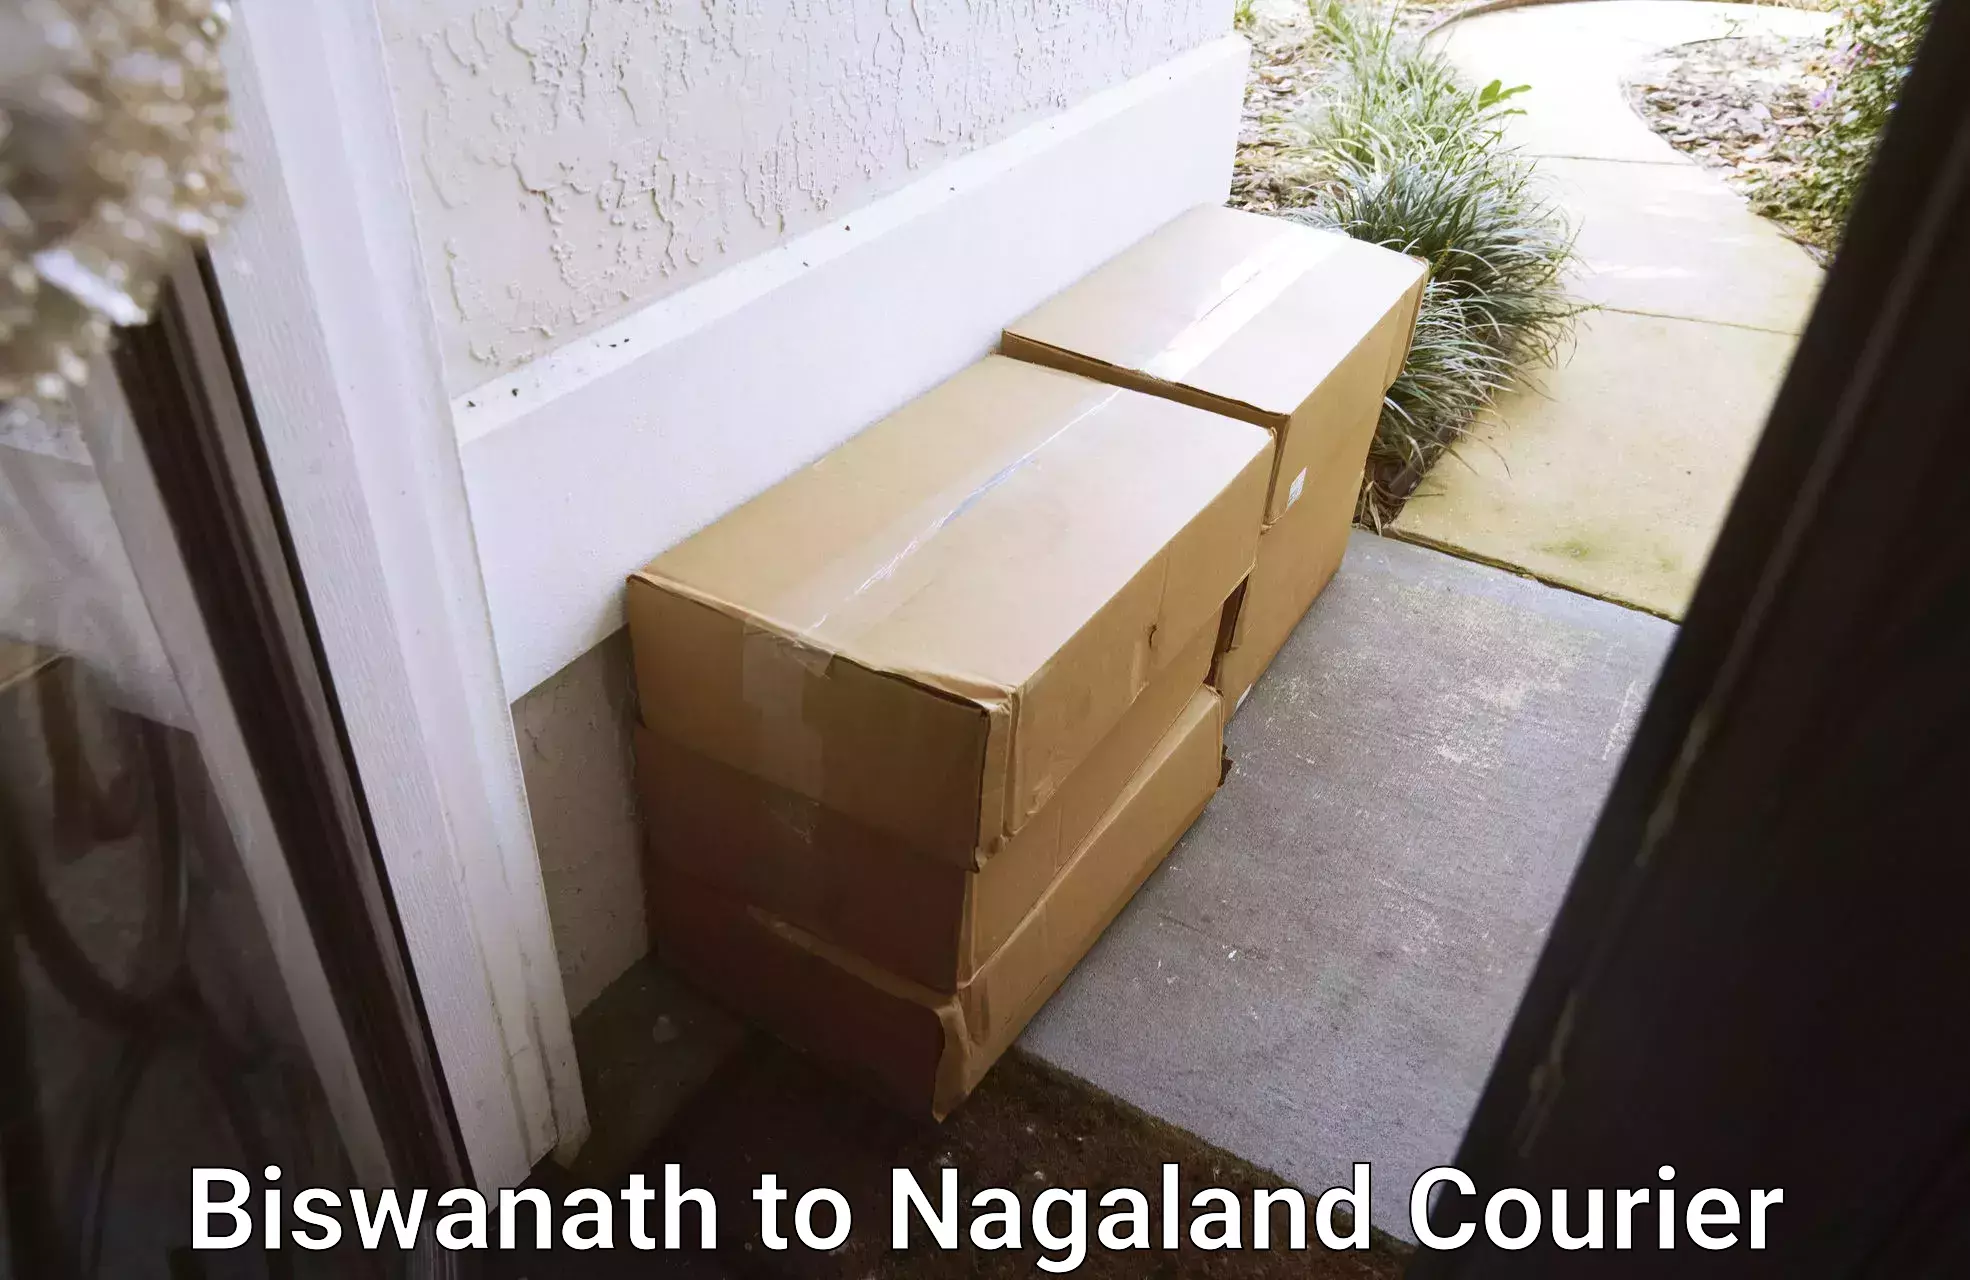 State-of-the-art courier technology in Biswanath to Dimapur